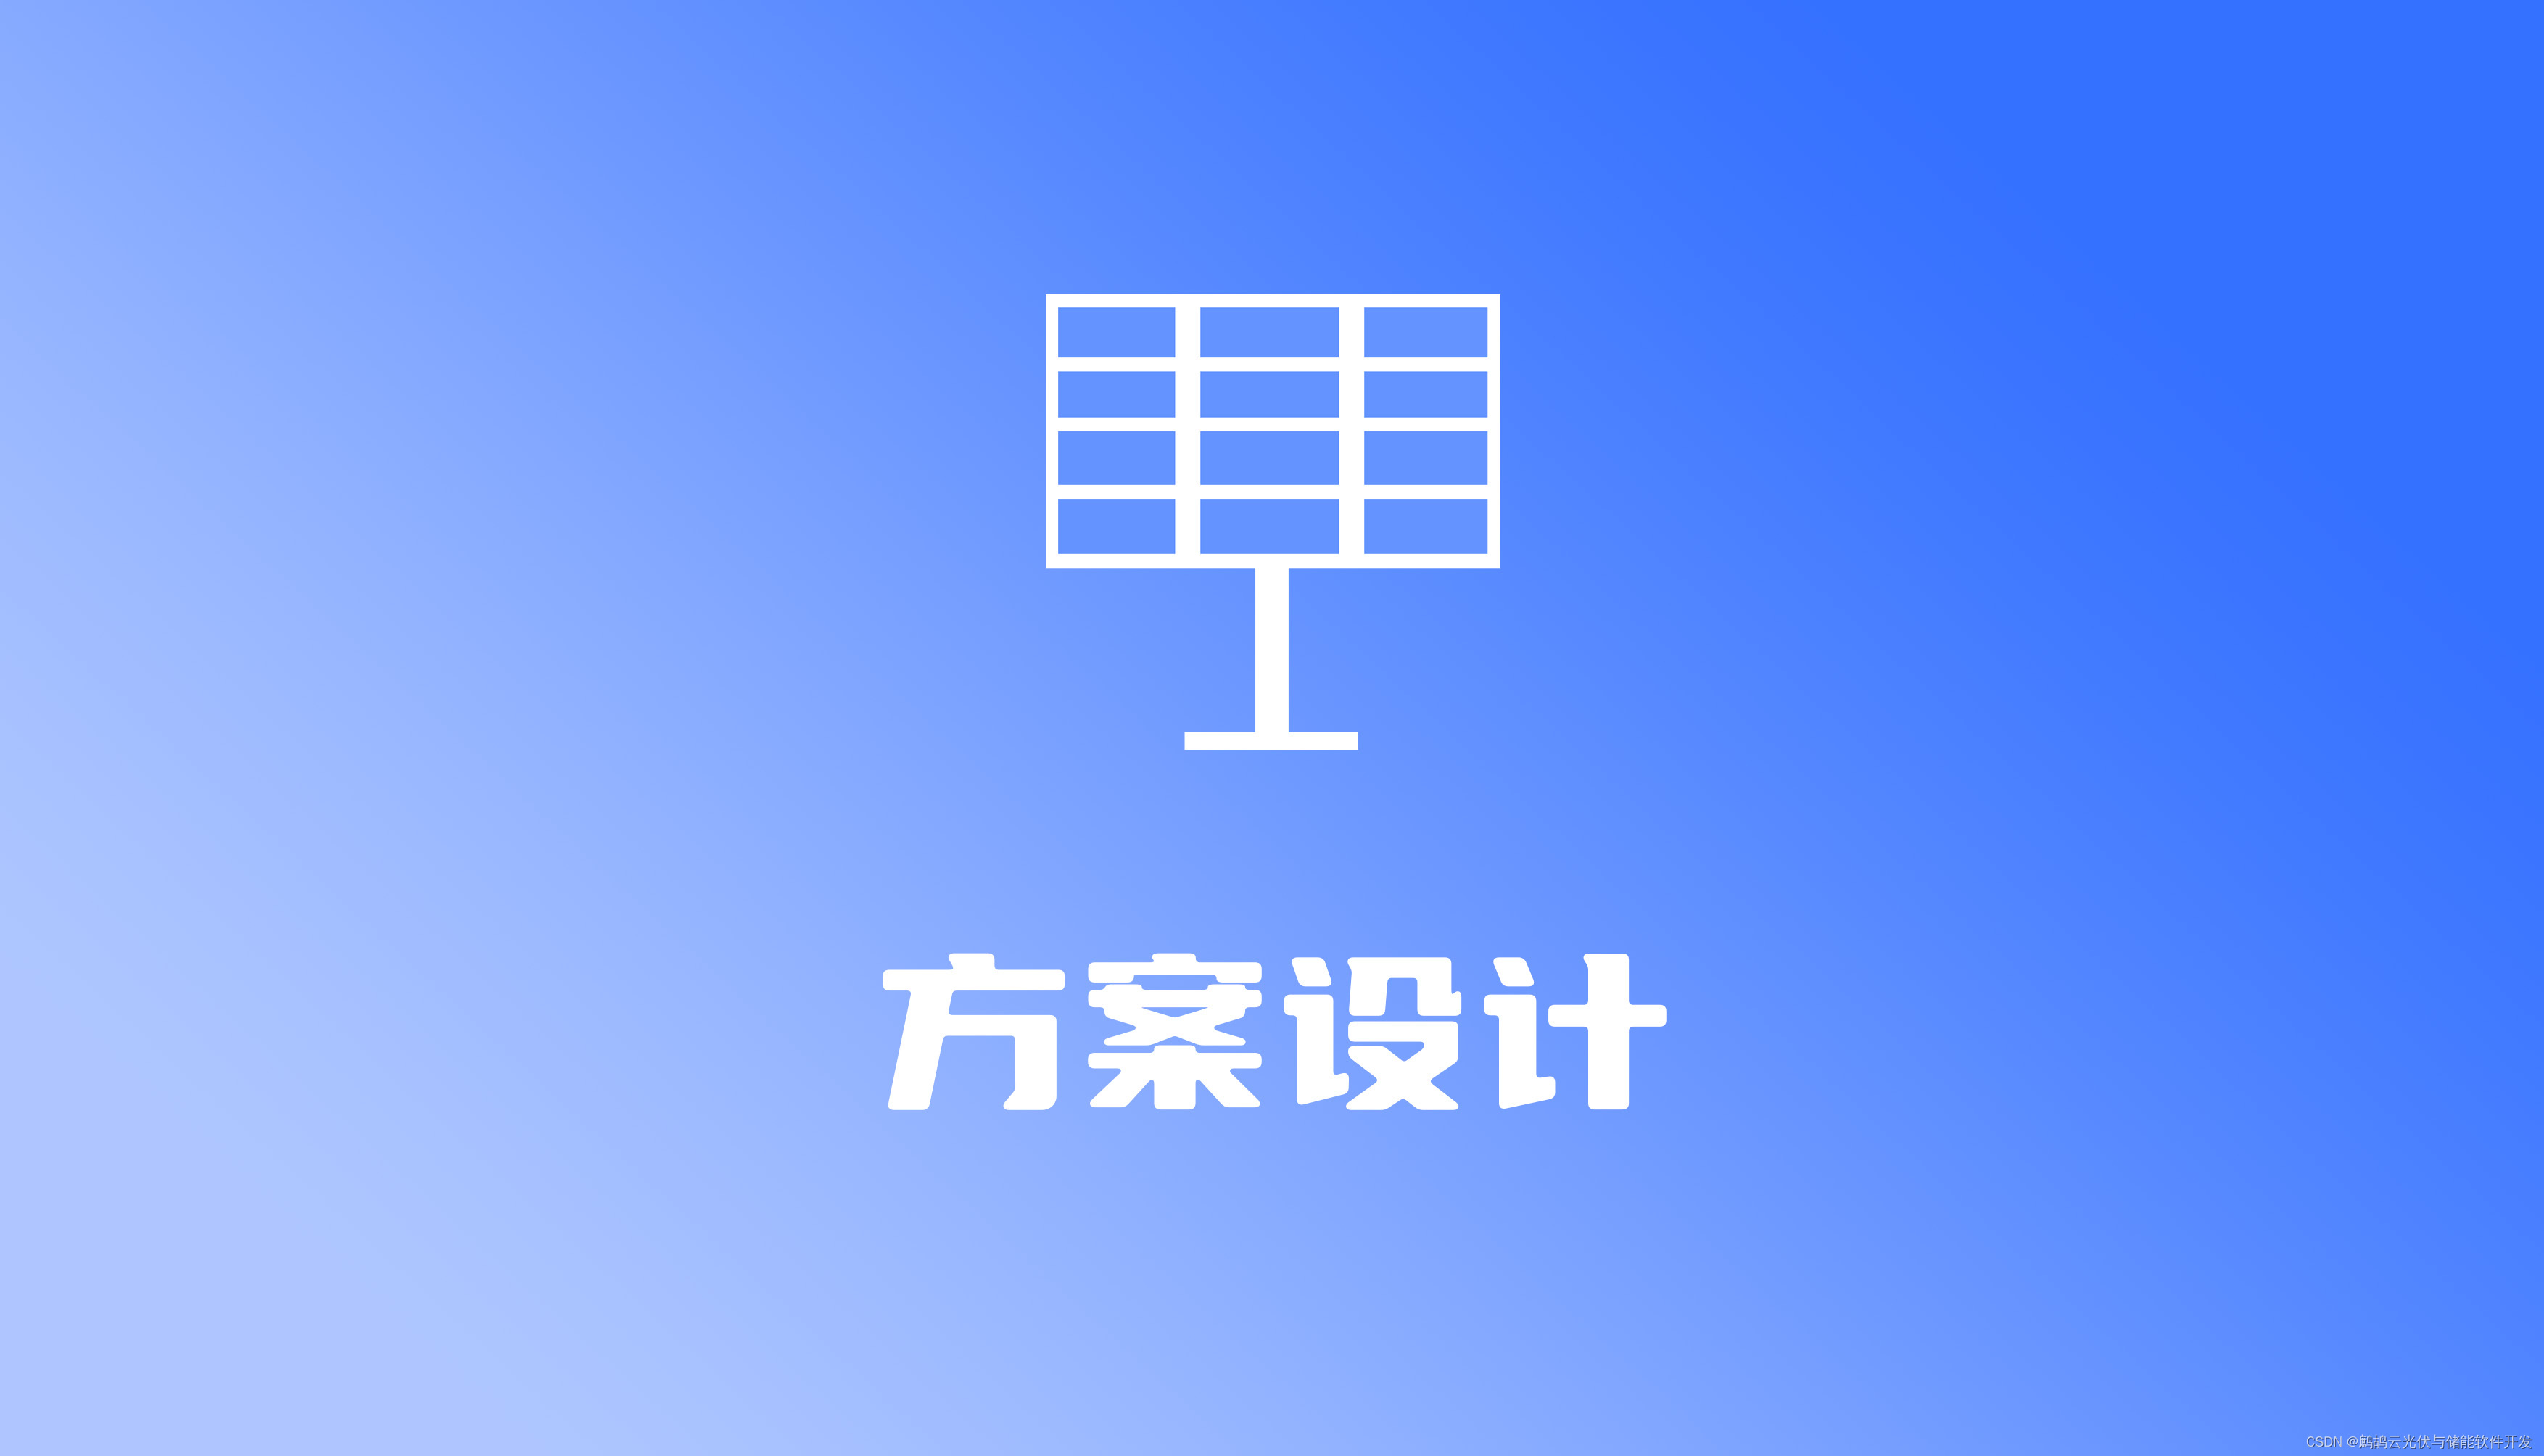 <span style='color:red;'>光</span><span style='color:red;'>伏</span><span style='color:red;'>系统</span>方案<span style='color:red;'>设计</span>的注意点